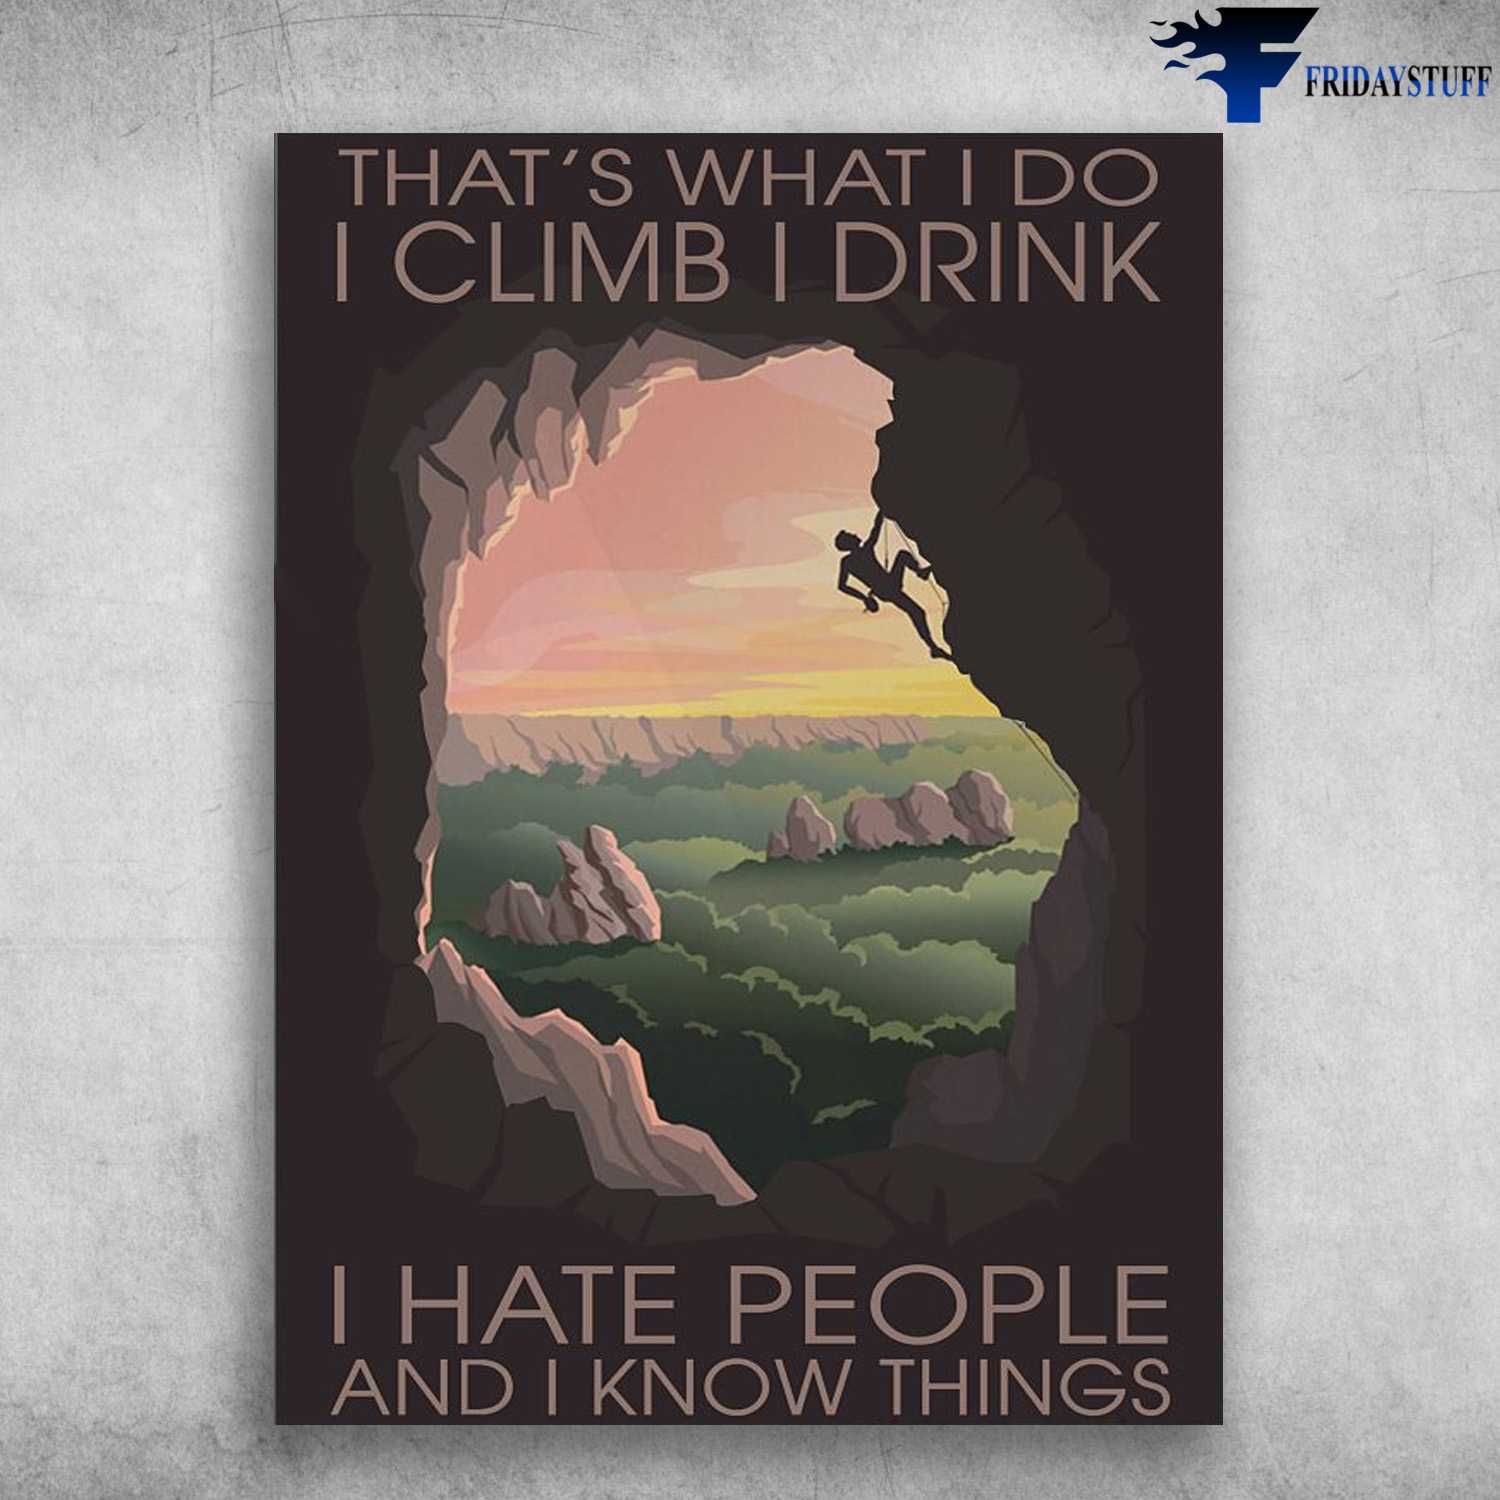 Mountain Climbing, Climbing Poster, That's What I Do, I Climb, I Drink, I Hate People, And I Know Things